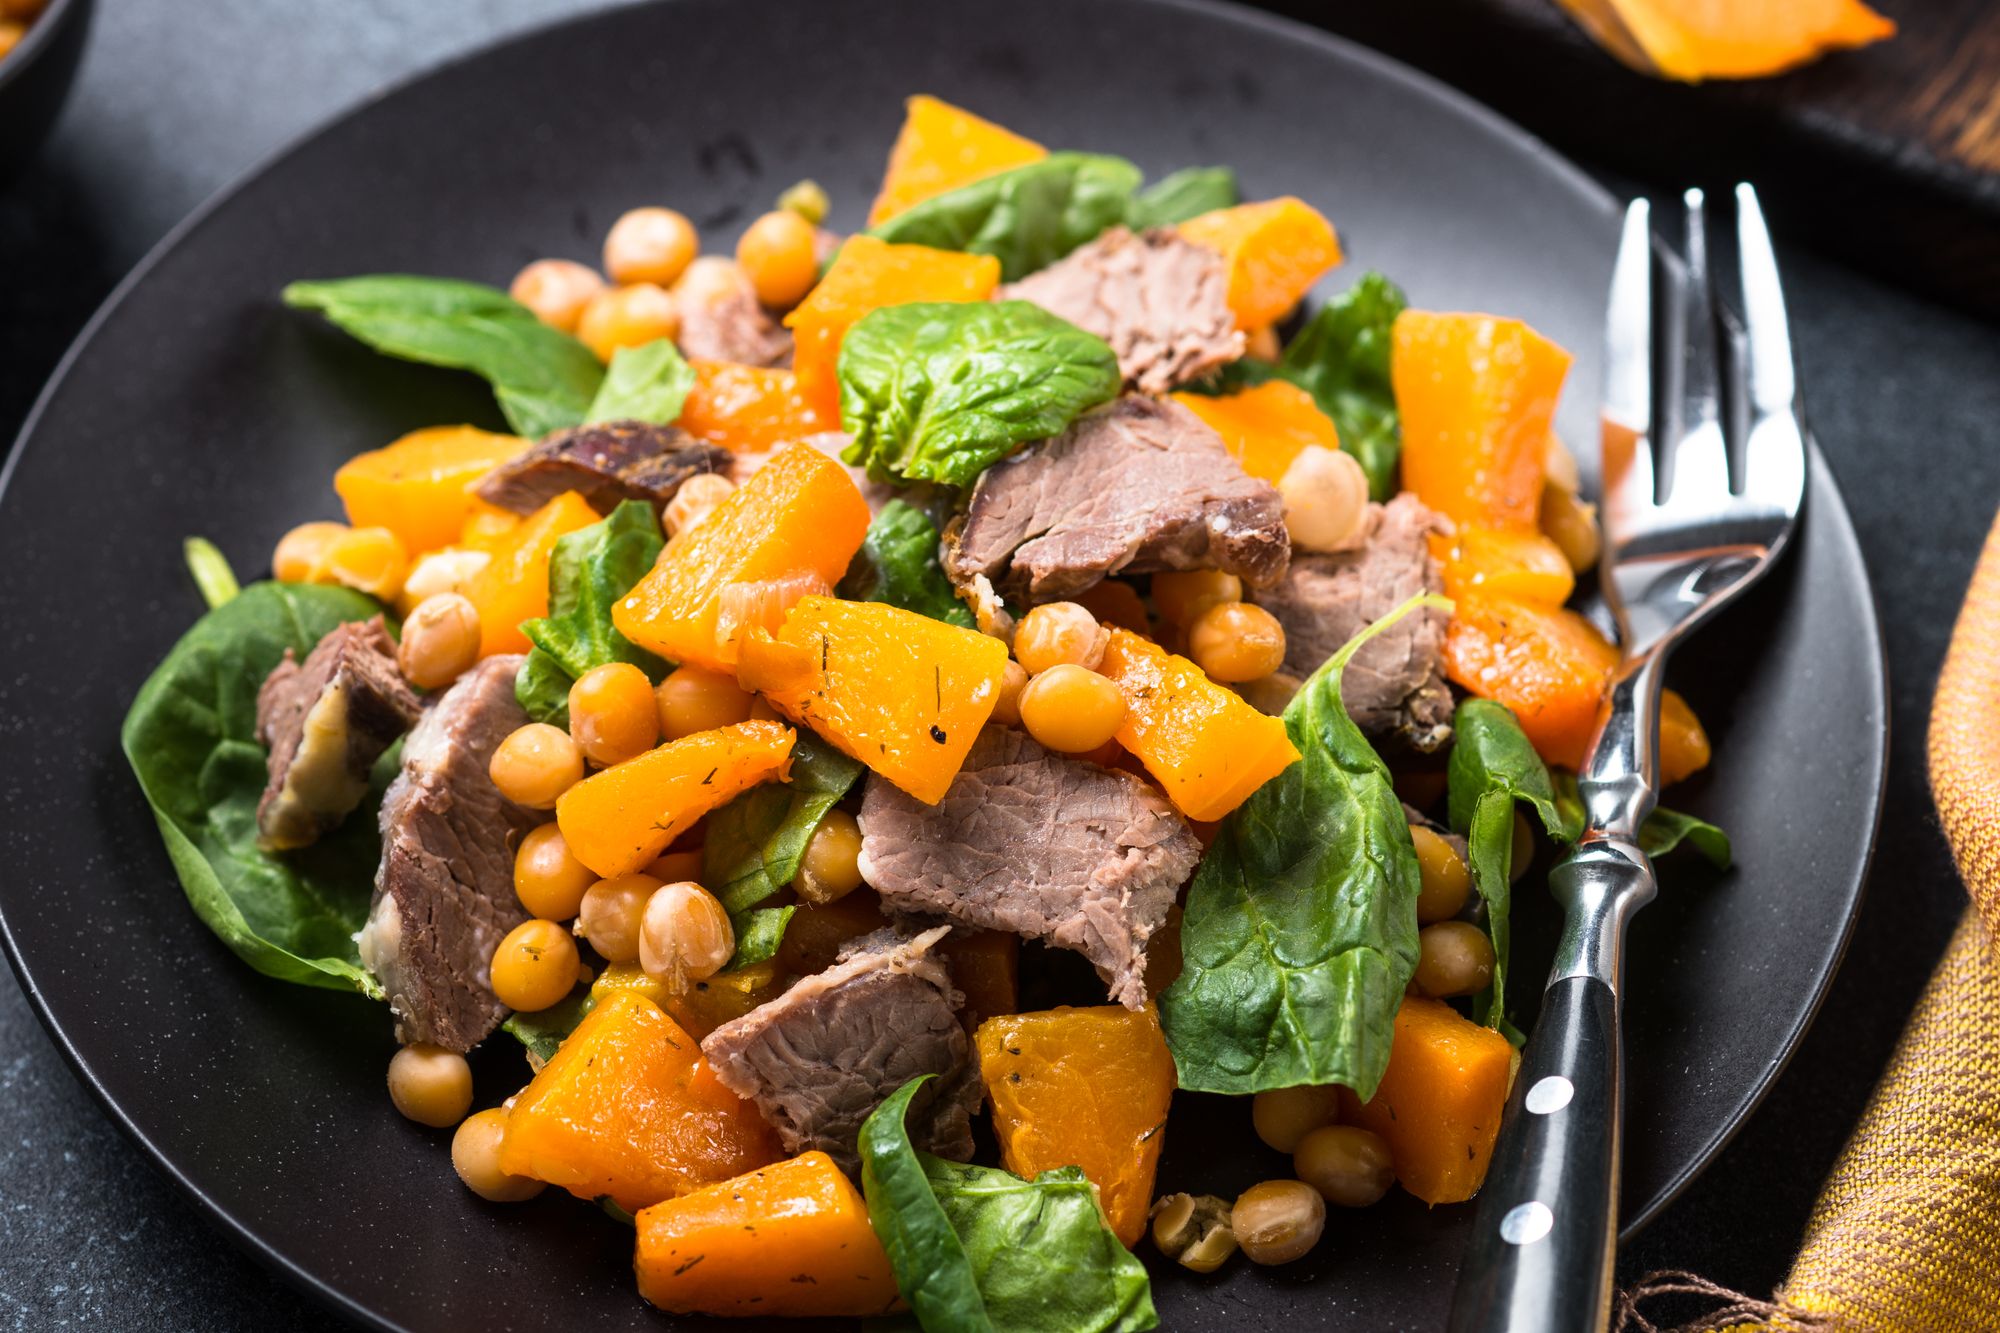 Warm Salad of Lamb and Chickpeas